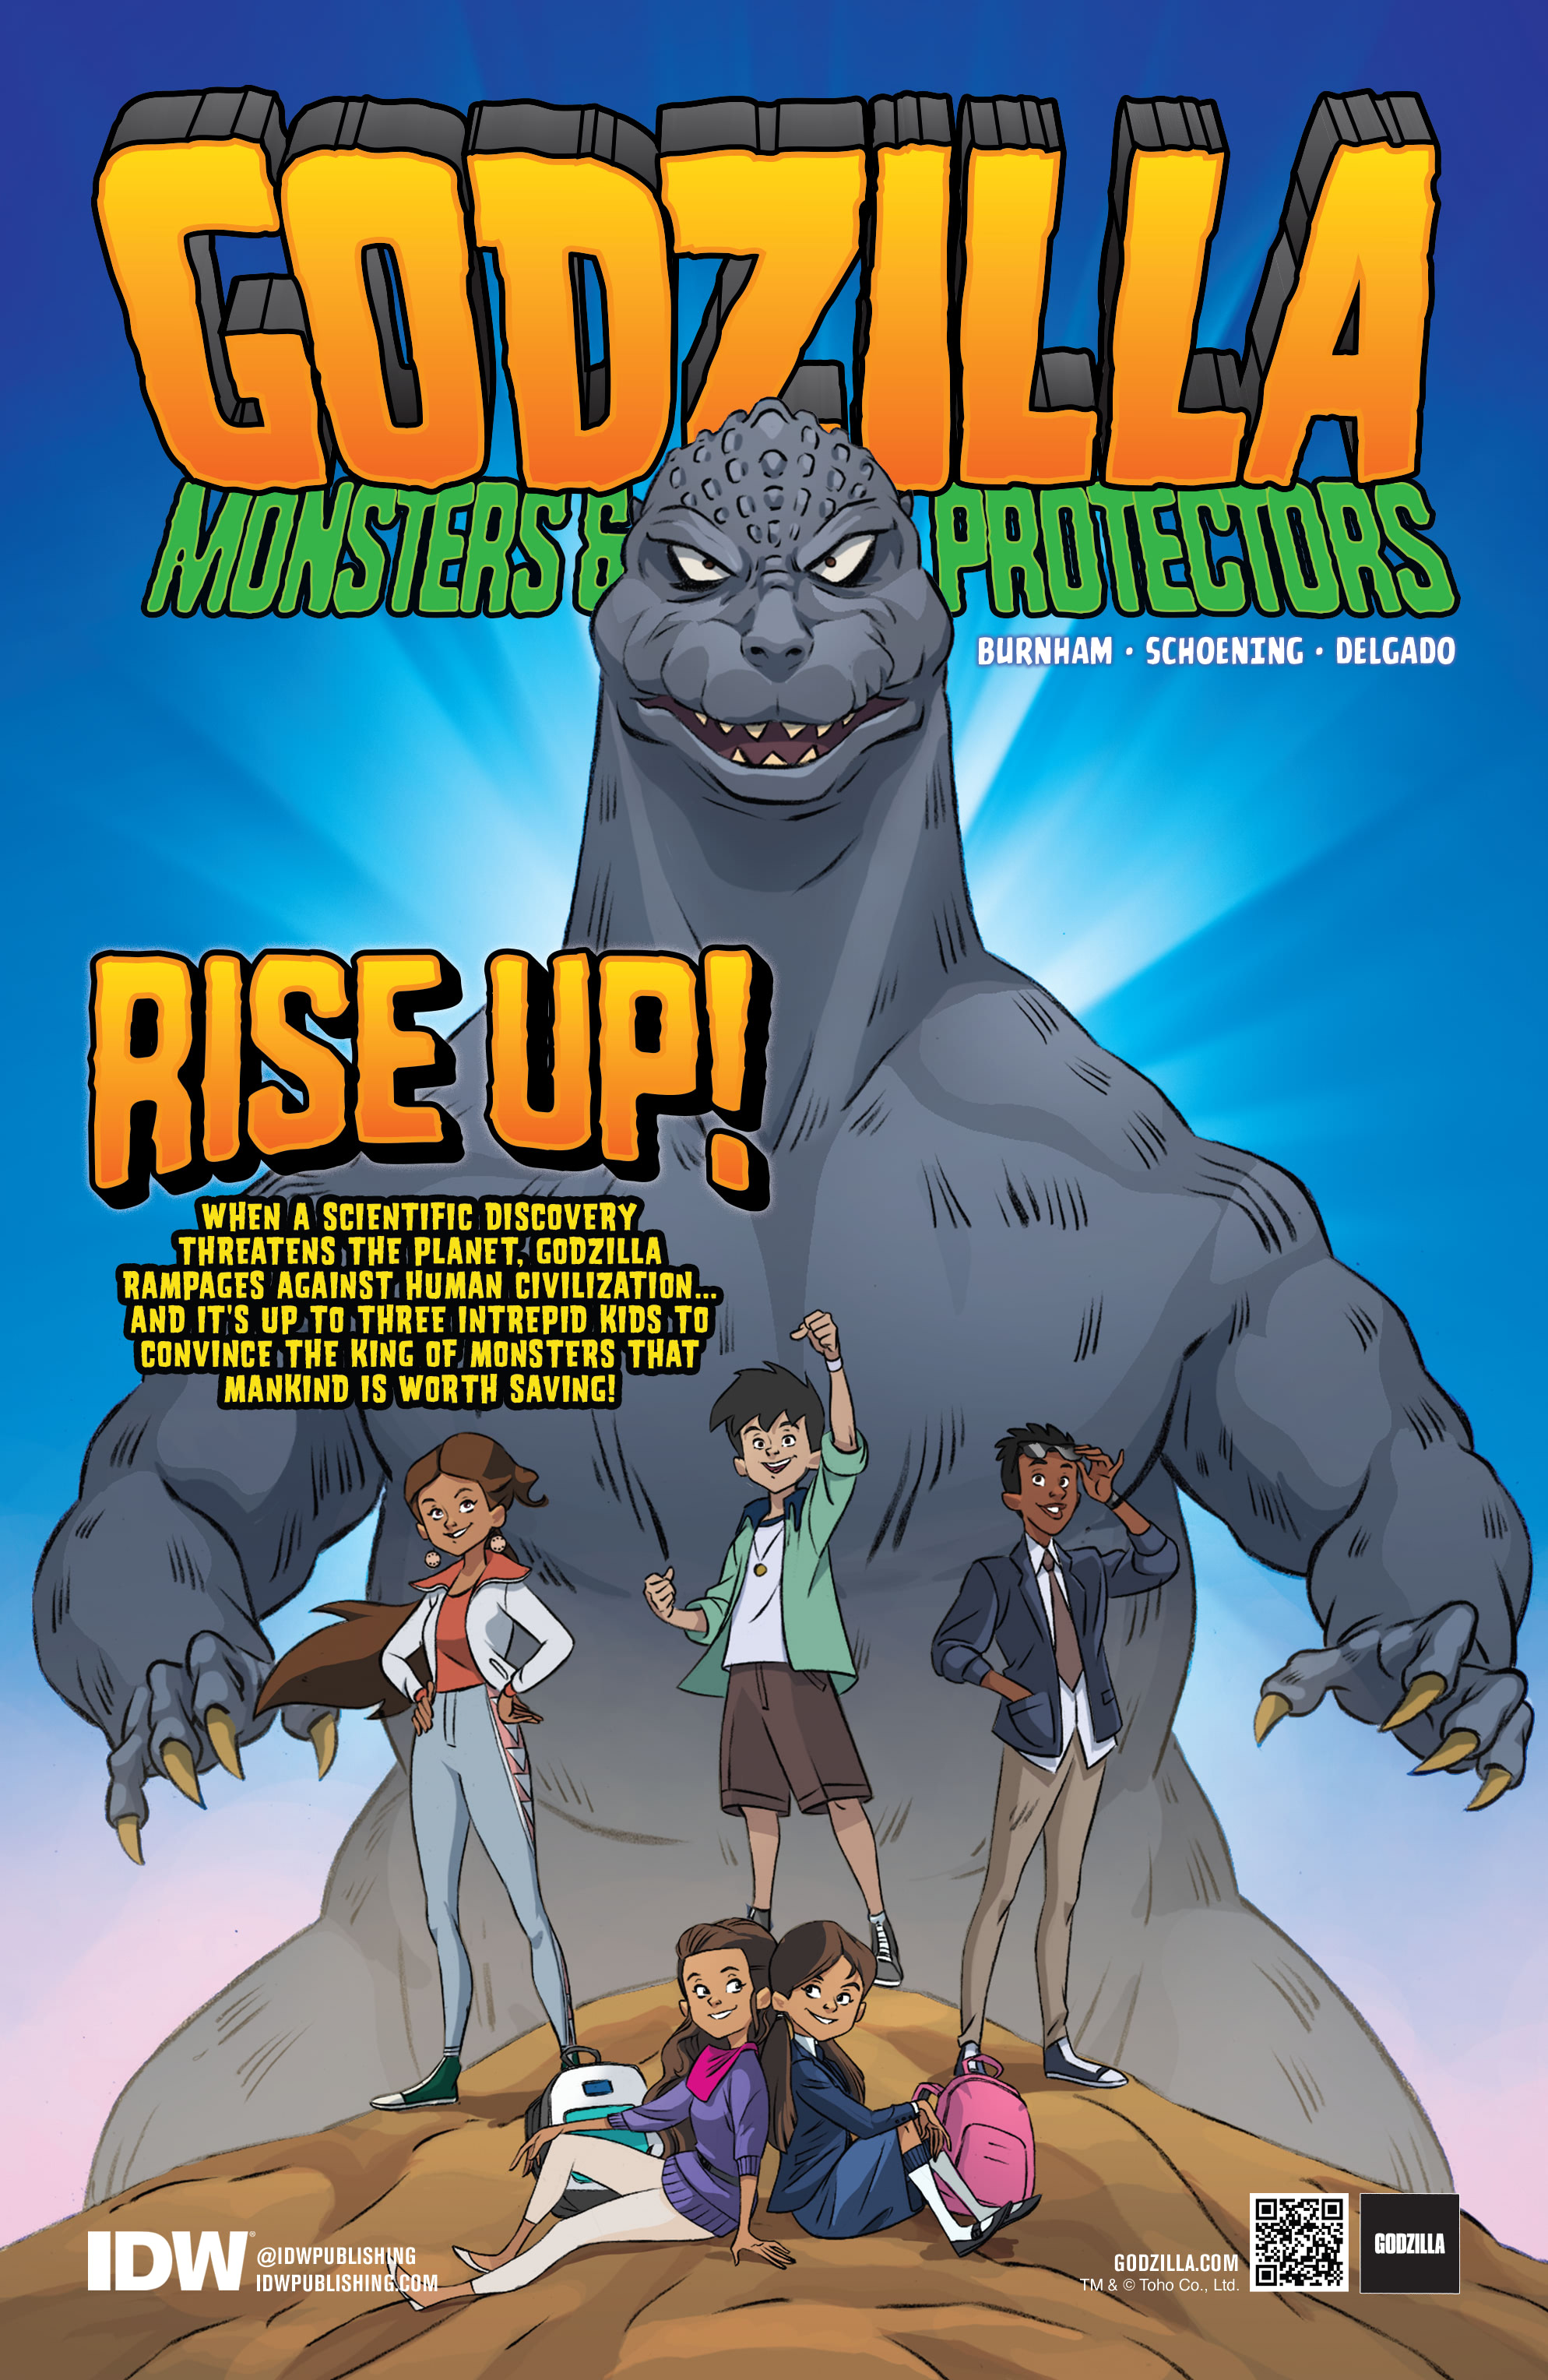 Read online Godzilla: Monsters & Protectors - All Hail the King! comic -  Issue #2 - 27